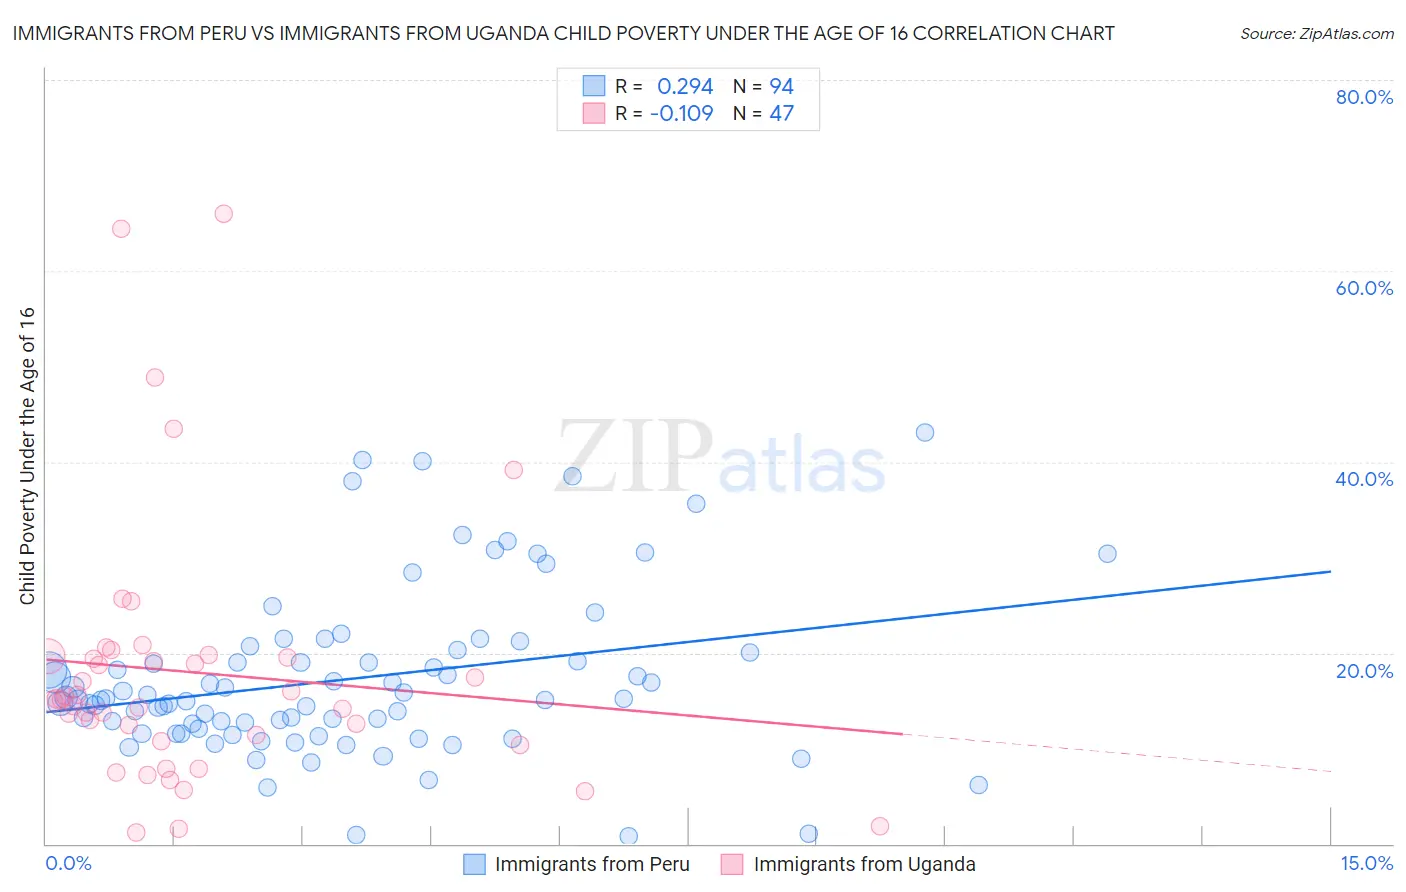 Immigrants from Peru vs Immigrants from Uganda Child Poverty Under the Age of 16